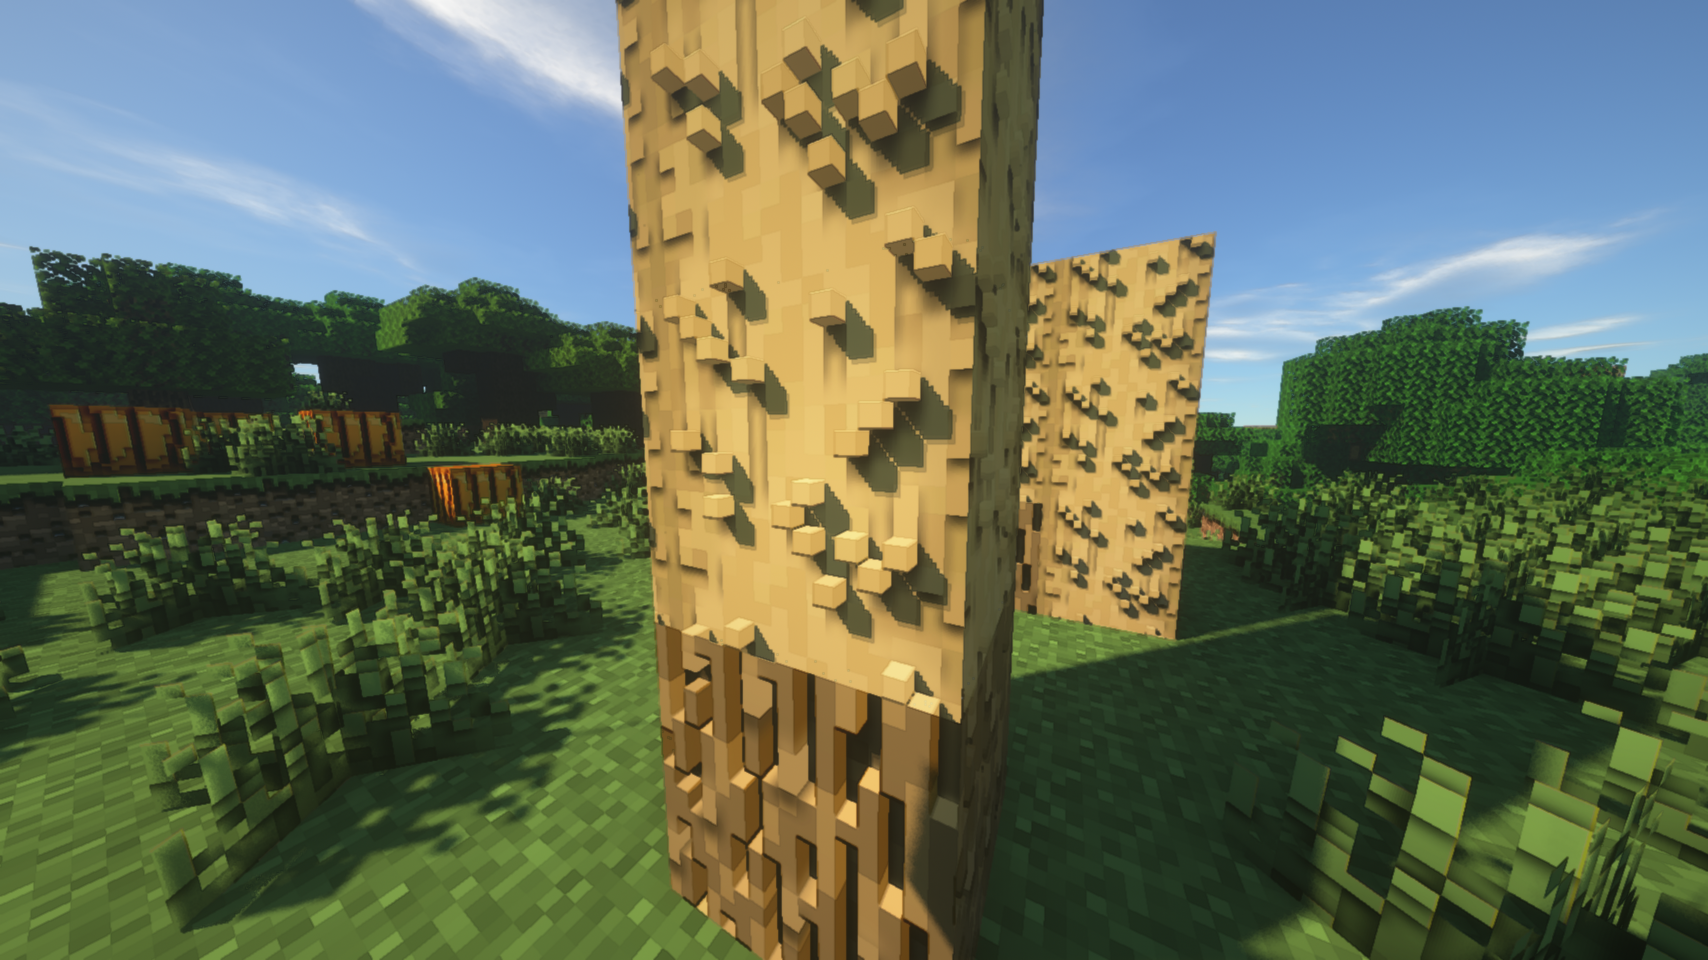 how to get shaders and texture packs in minecraft